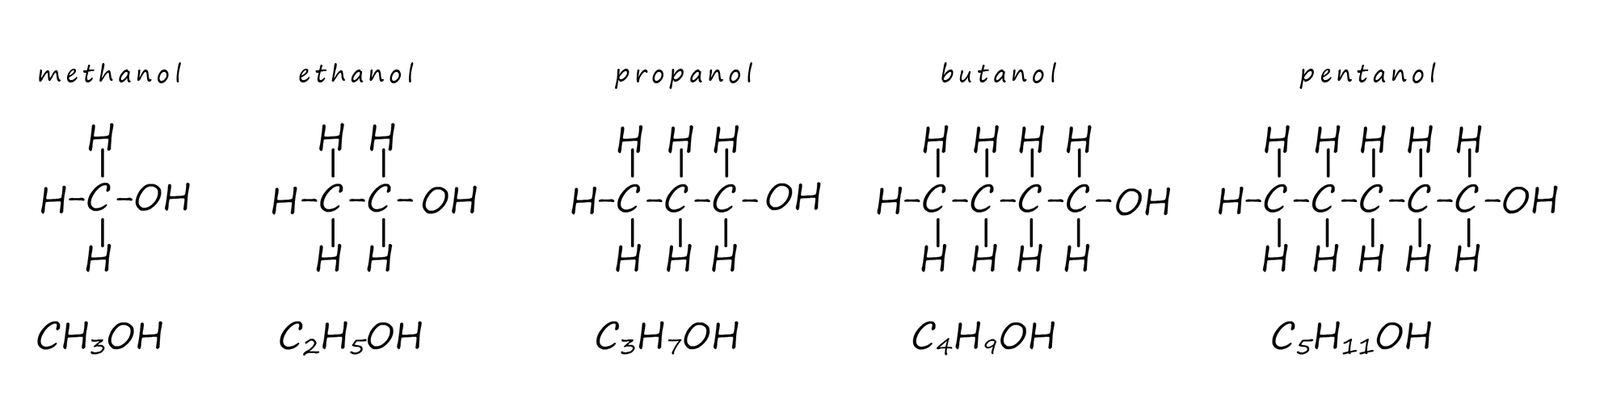 structural formula for alcohols